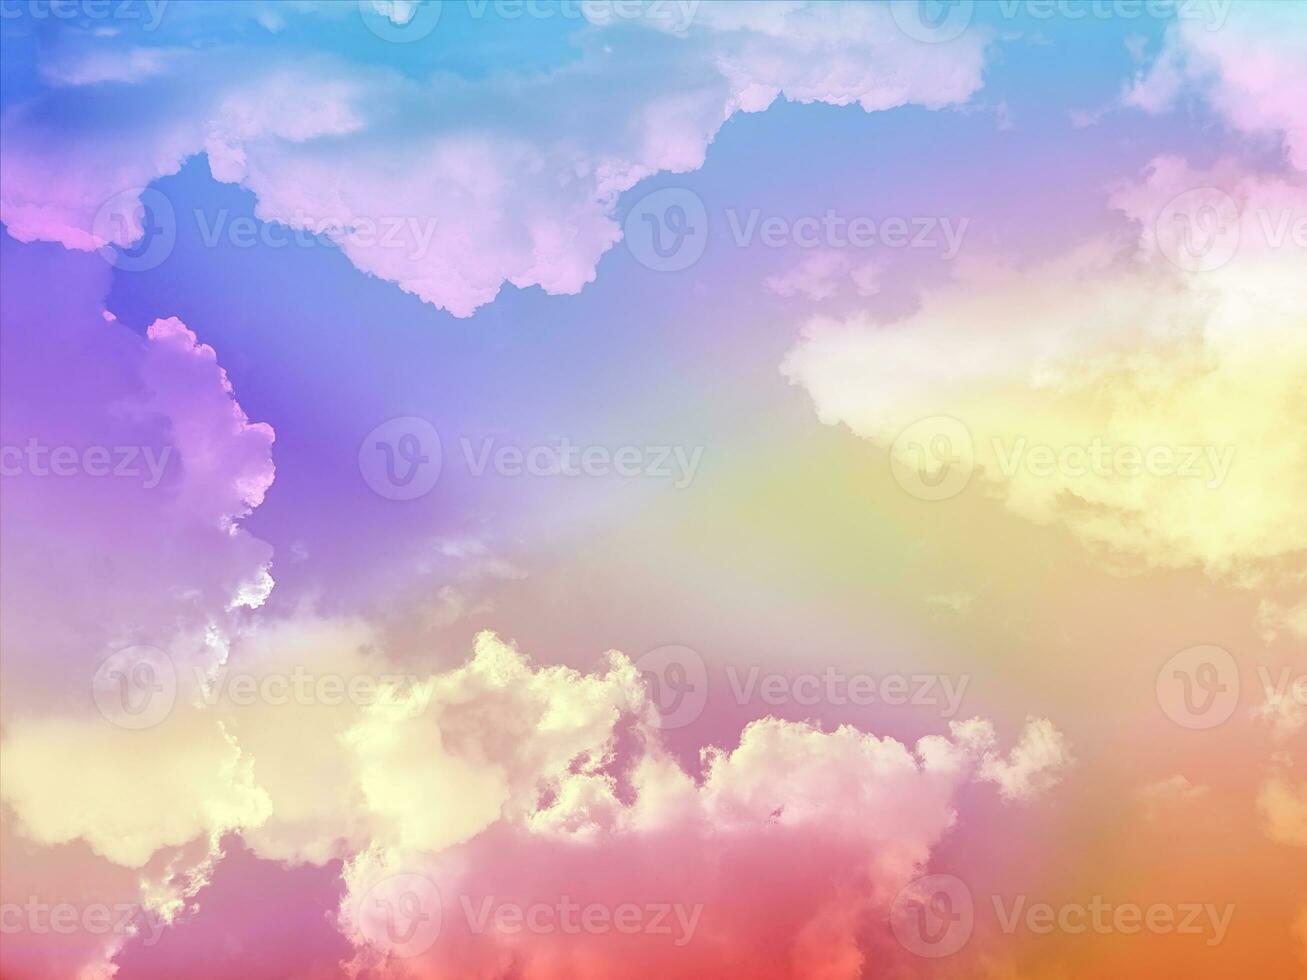 beauty sweet pastel red yellow colorful with fluffy clouds on sky. multi color rainbow image. abstract fantasy growing light photo